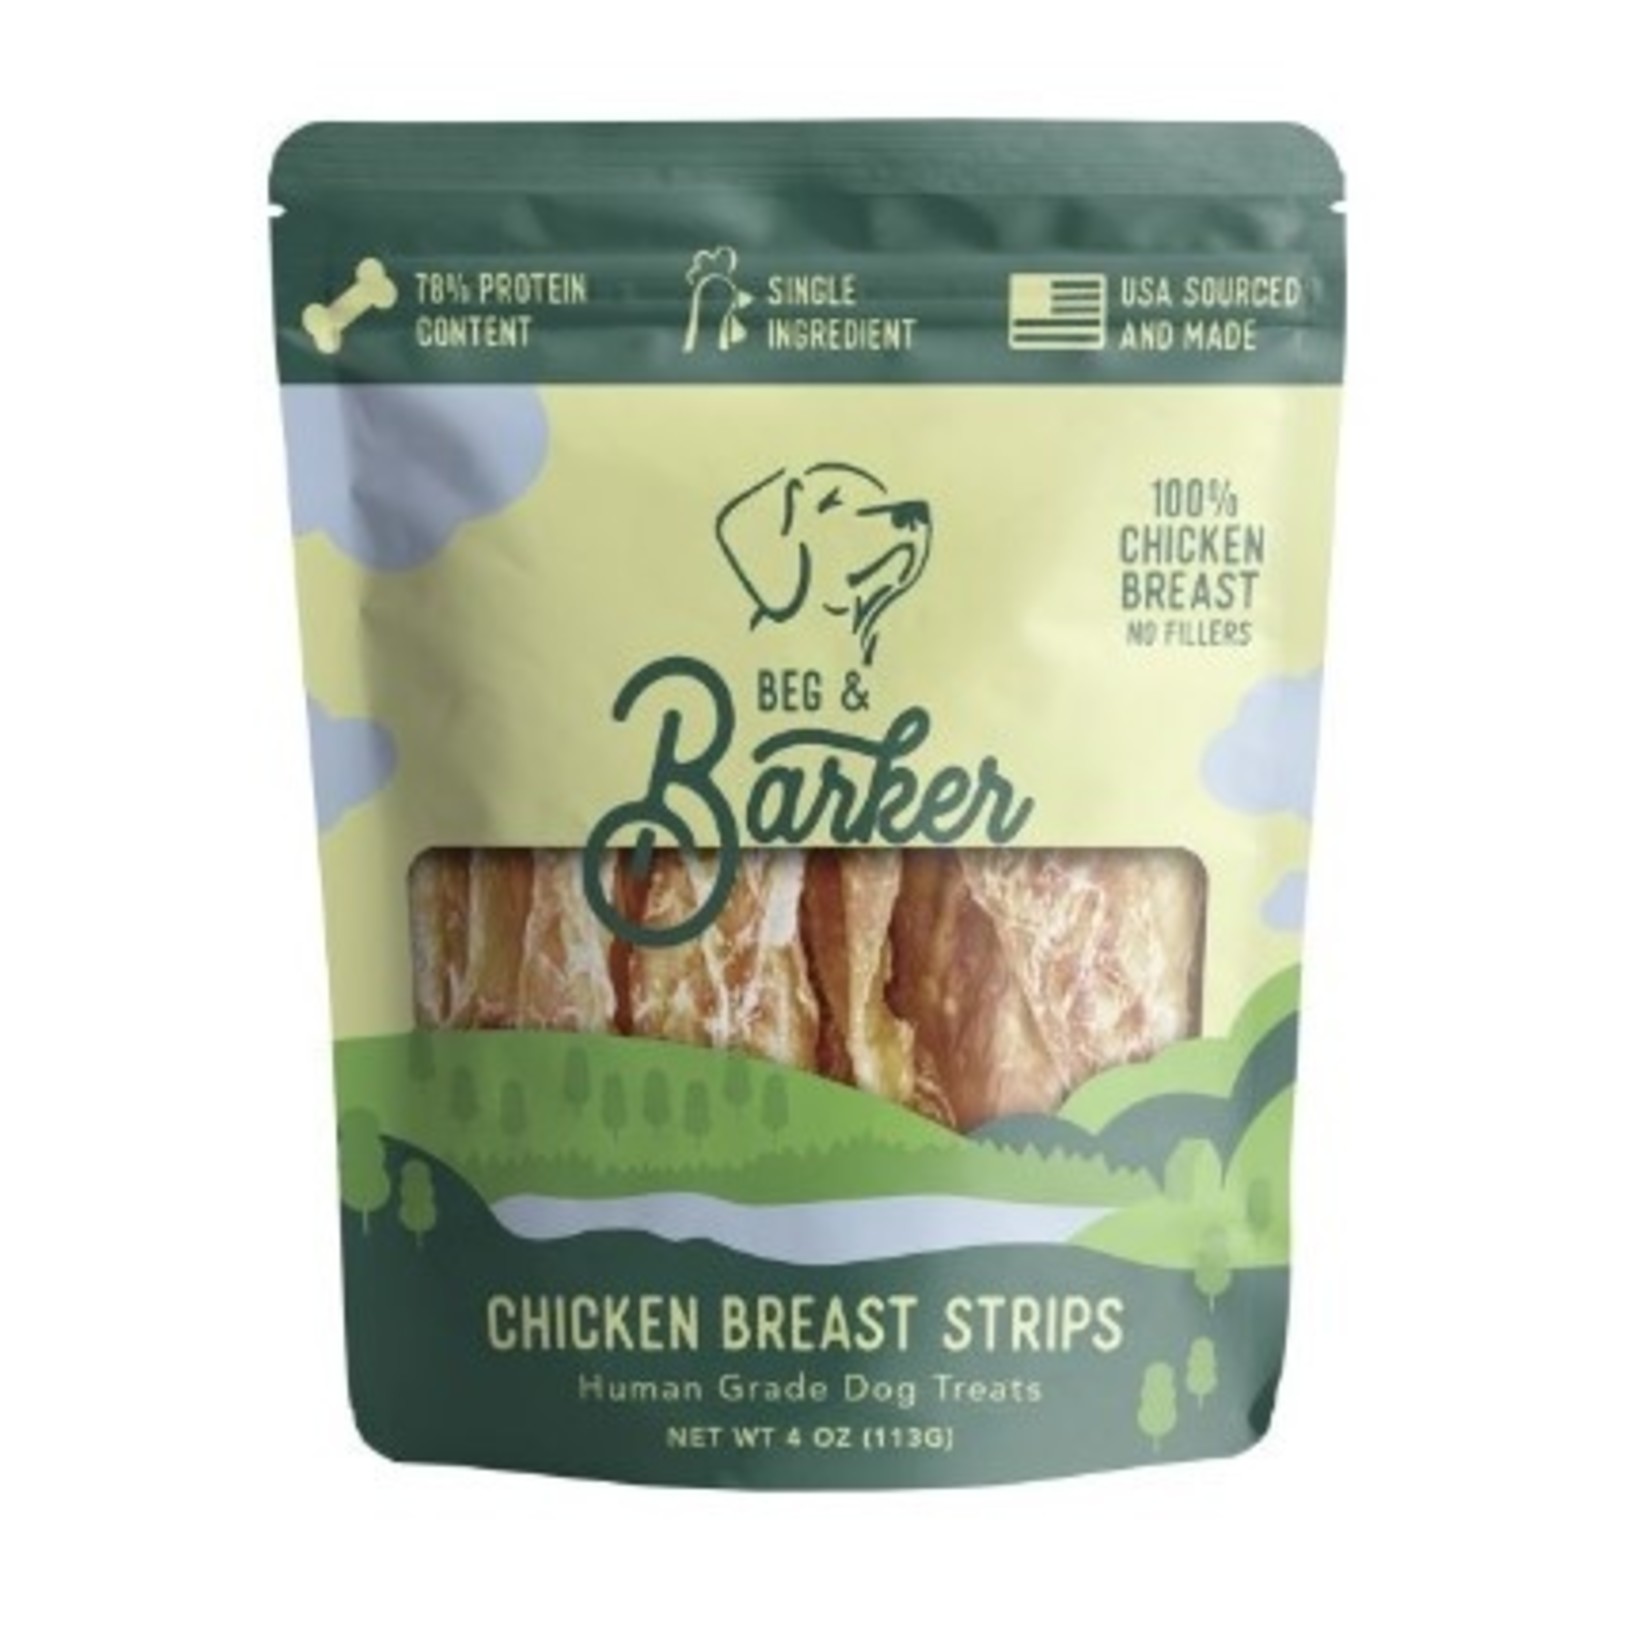 Beg and Barker BEG AND BARKER Chicken Breast Strips Dog Treat 4oz